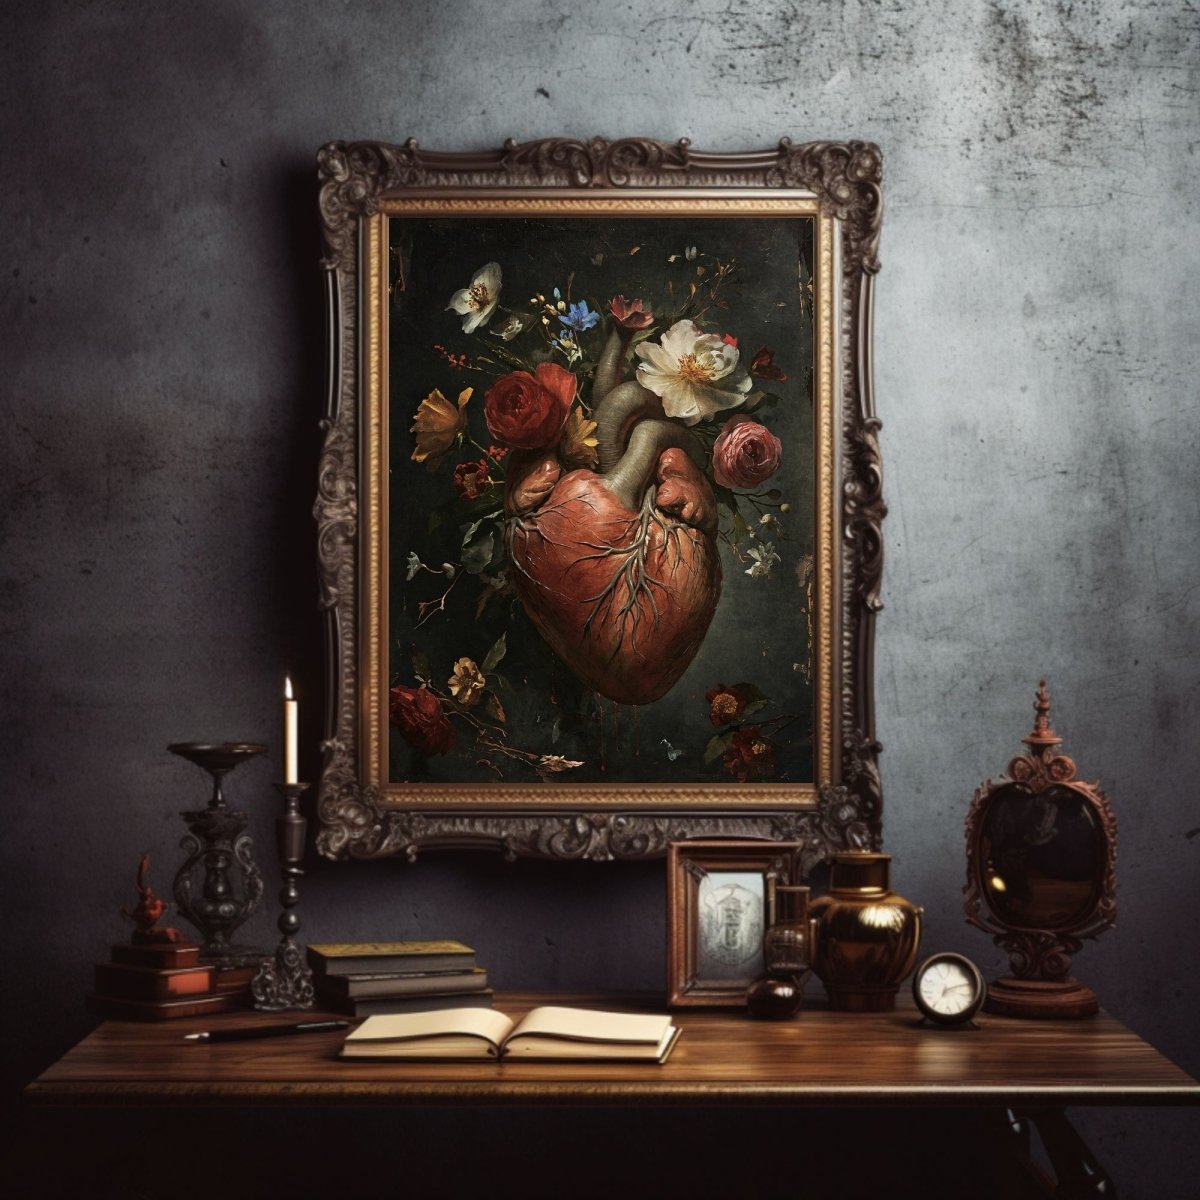 Macabre Valentine Gothic Wall Art Antique Oil Painting Human Heart with Flowers Creepy Gothic Decor Goblincore Decor Dark Romance Print Paper Poster Print - Everything Pixel